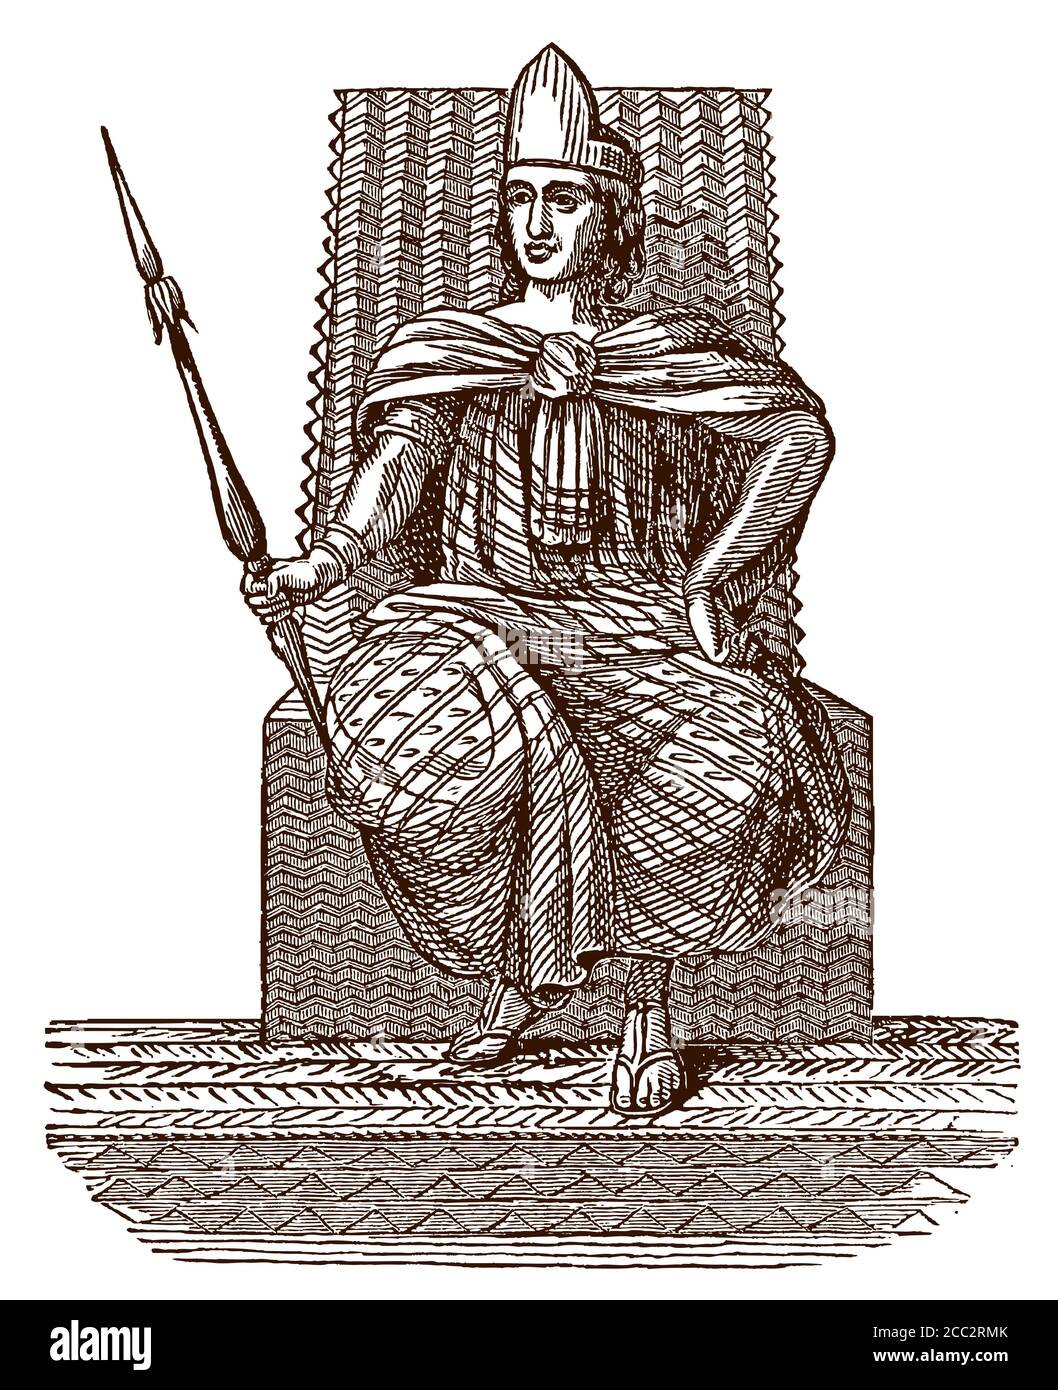 Montezuma II, the historic Aztec ruler of Tenochtitlan sitting on his throne and holding a spear. Illustration after an antique engraving Stock Vector